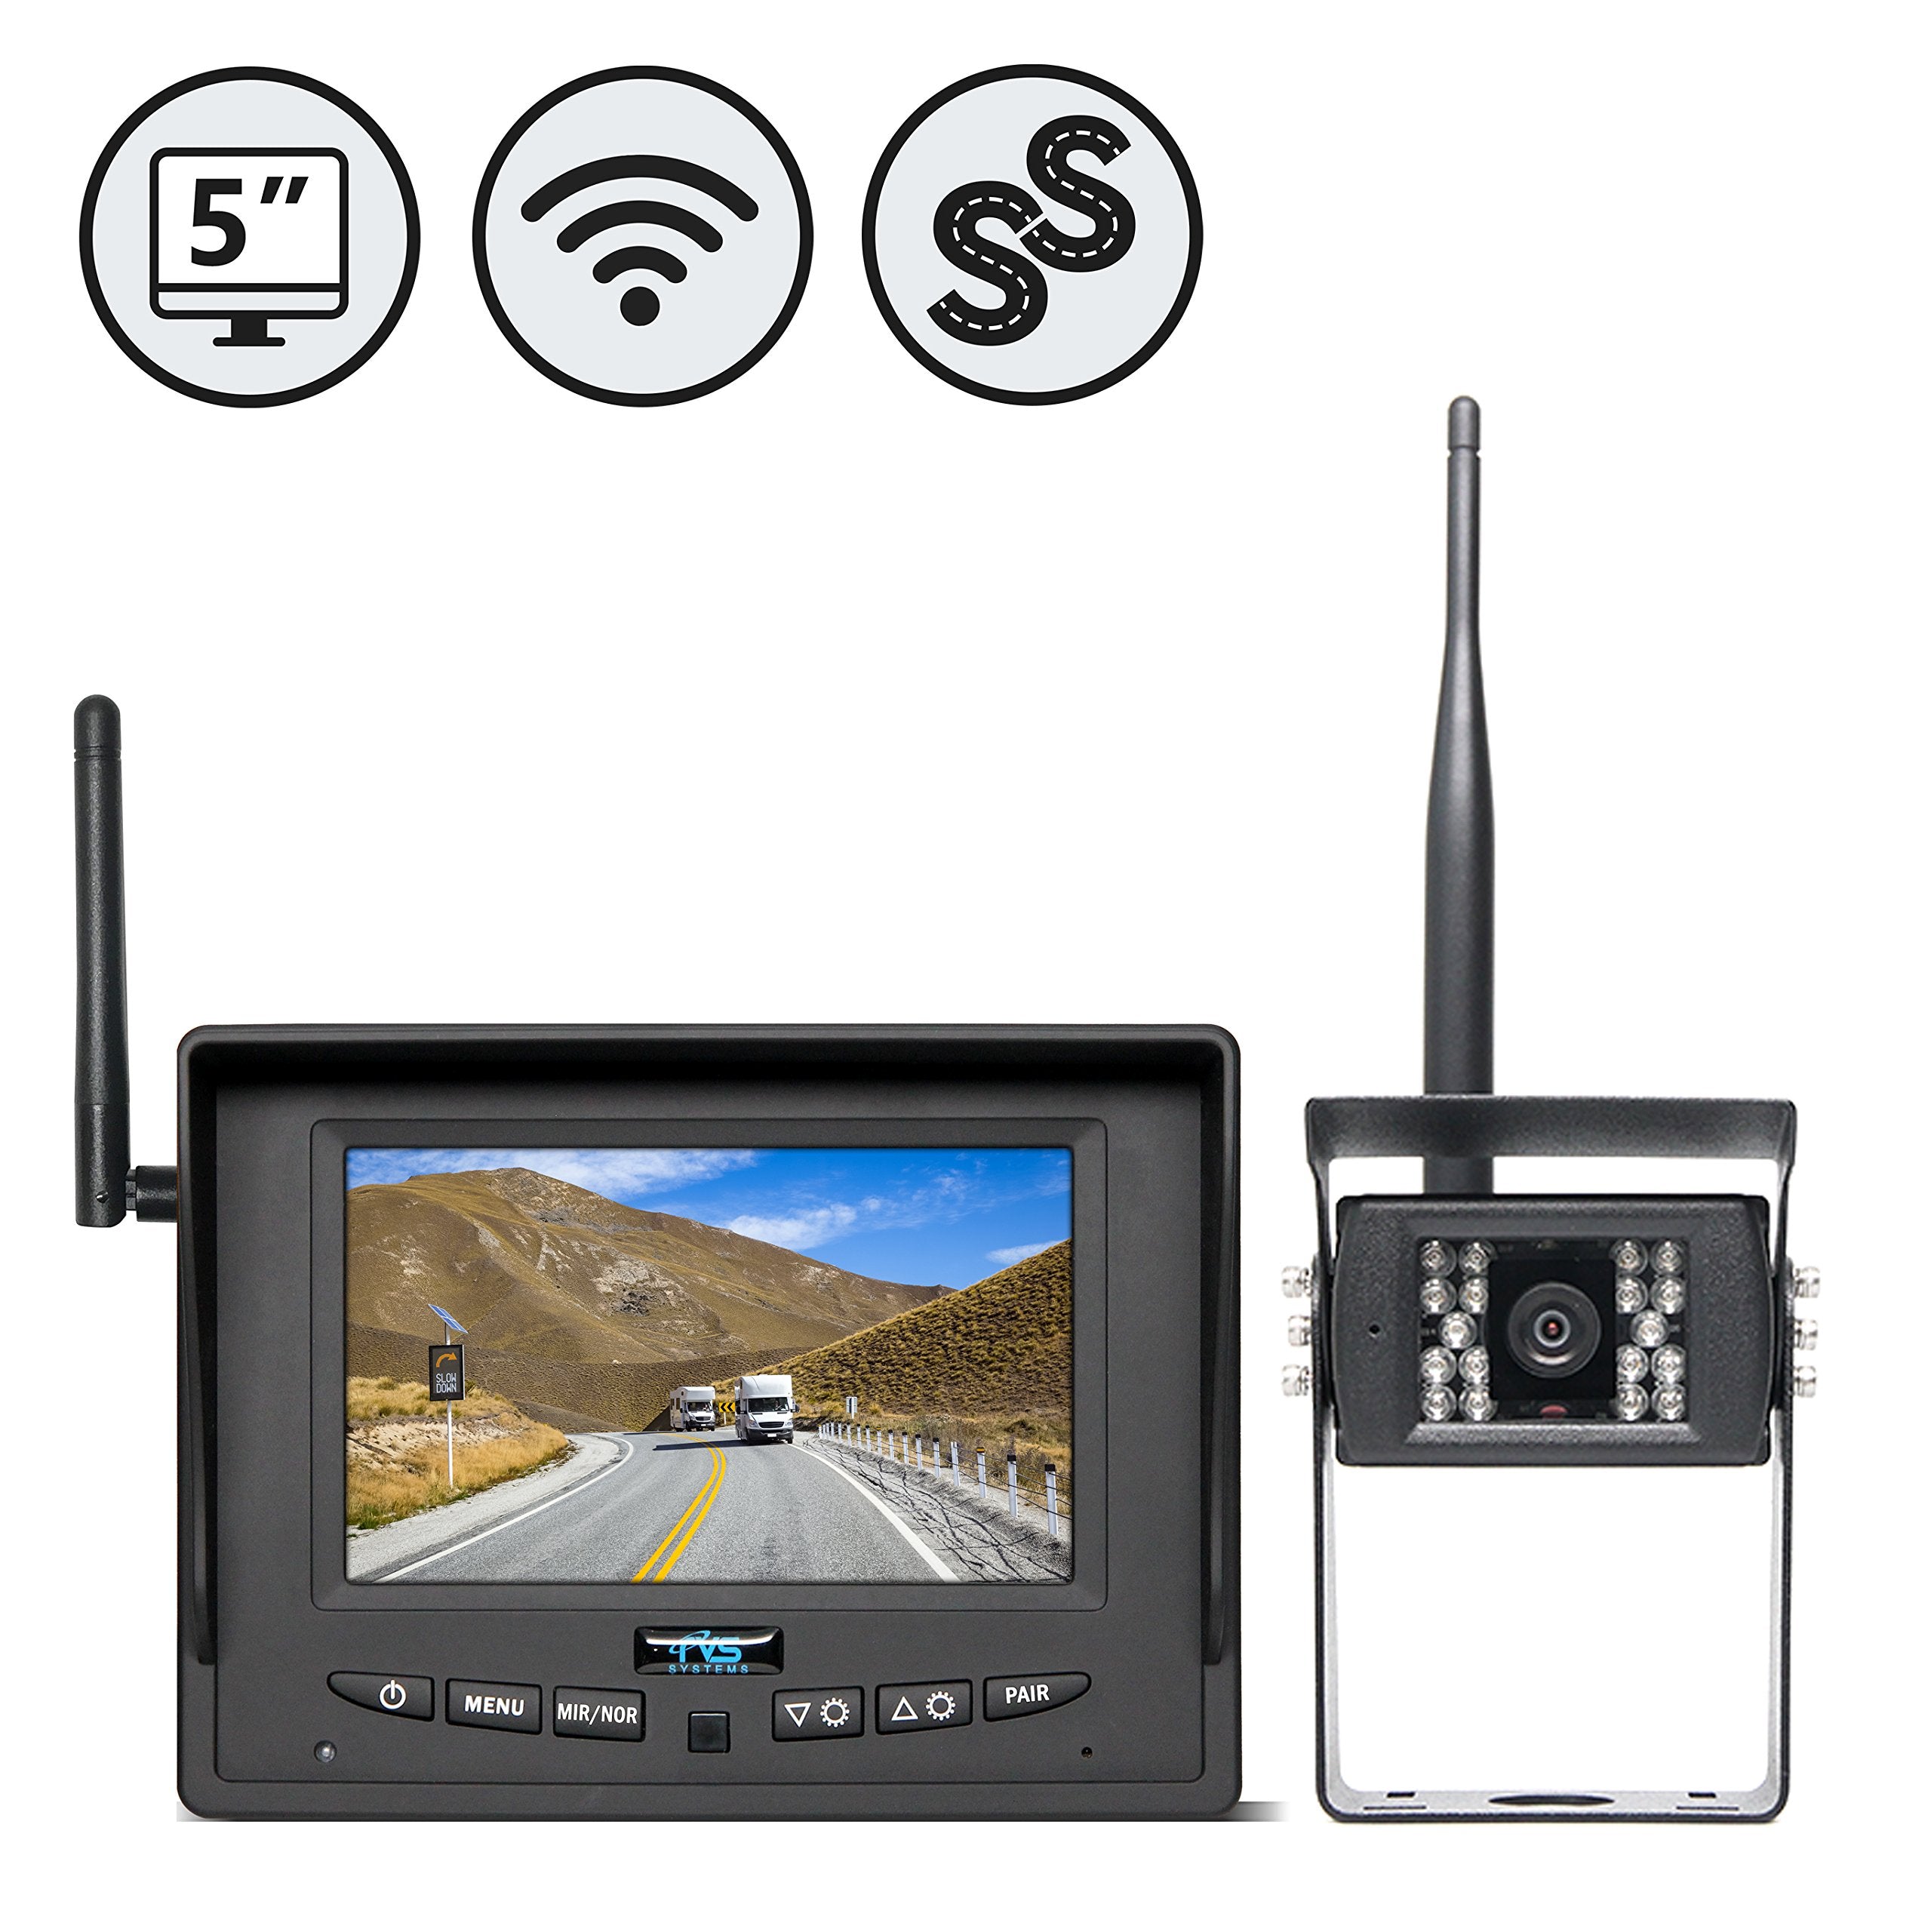 Rear View Safety Wireless Backup Camera System for RV, Truck, Bus (with Furrion Prewire Bracket) RVS-155W